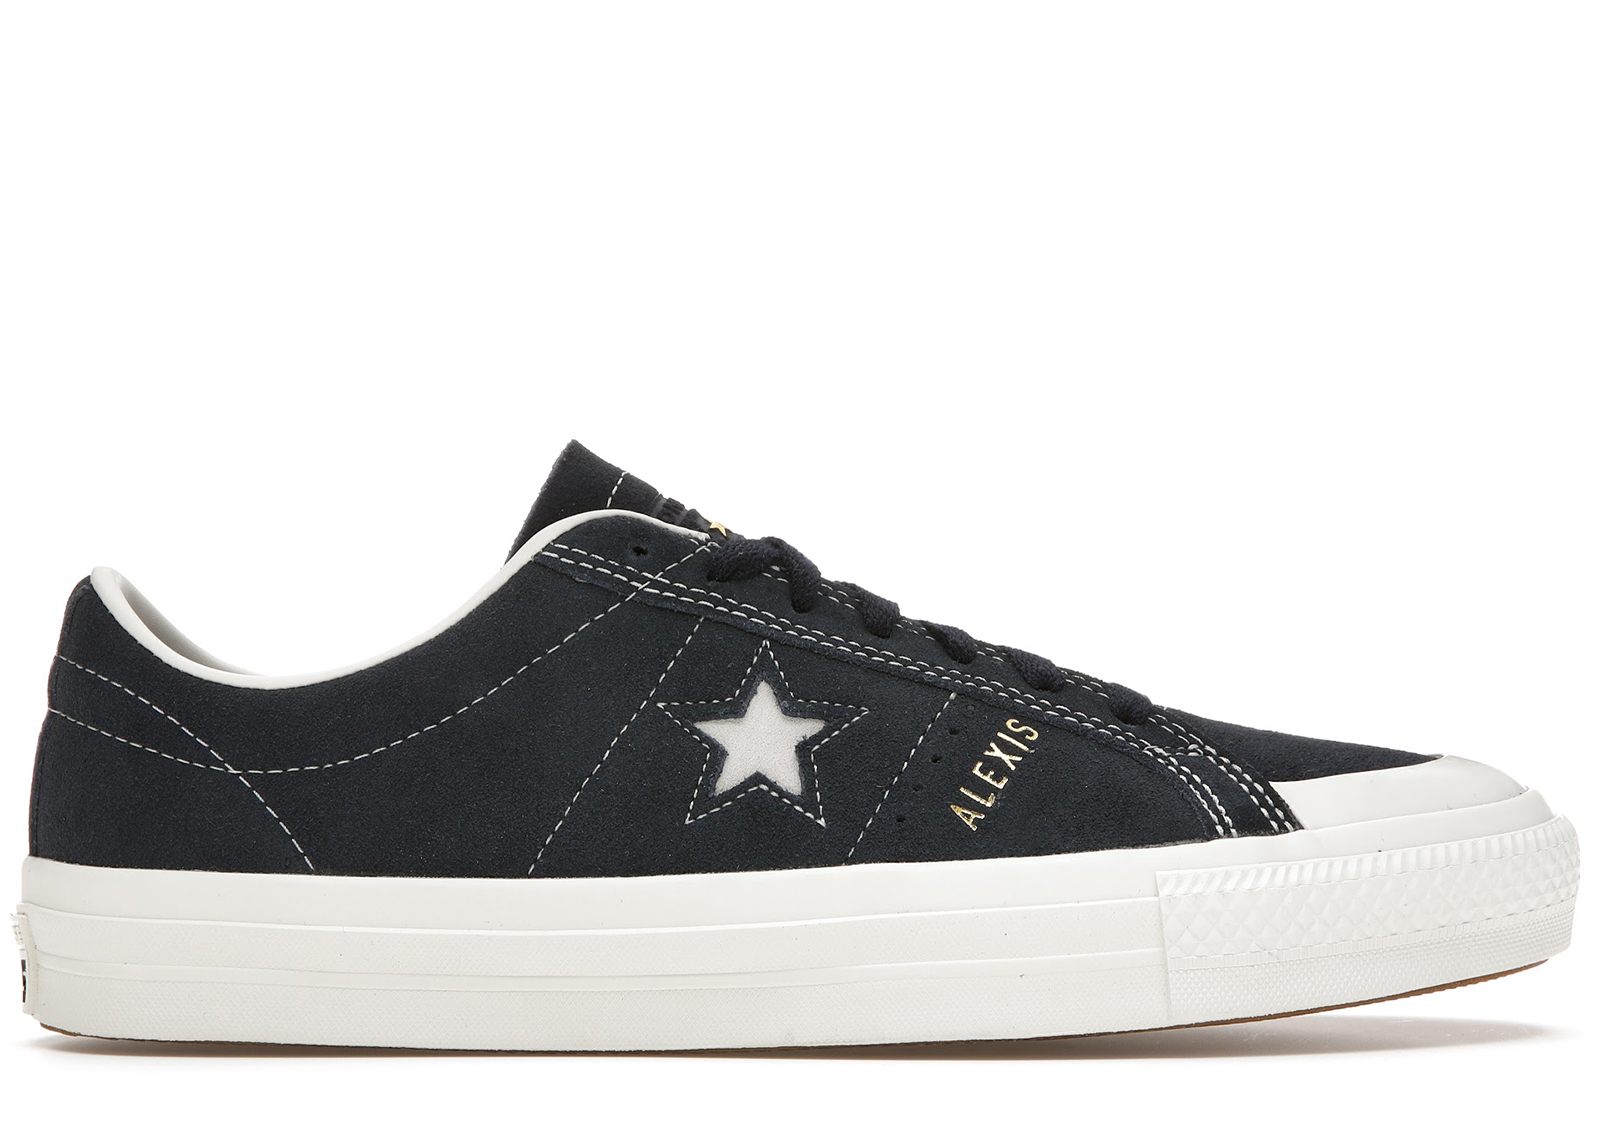 Converse CONS One Star Pro AS Obsidian Men's - 167615C - US